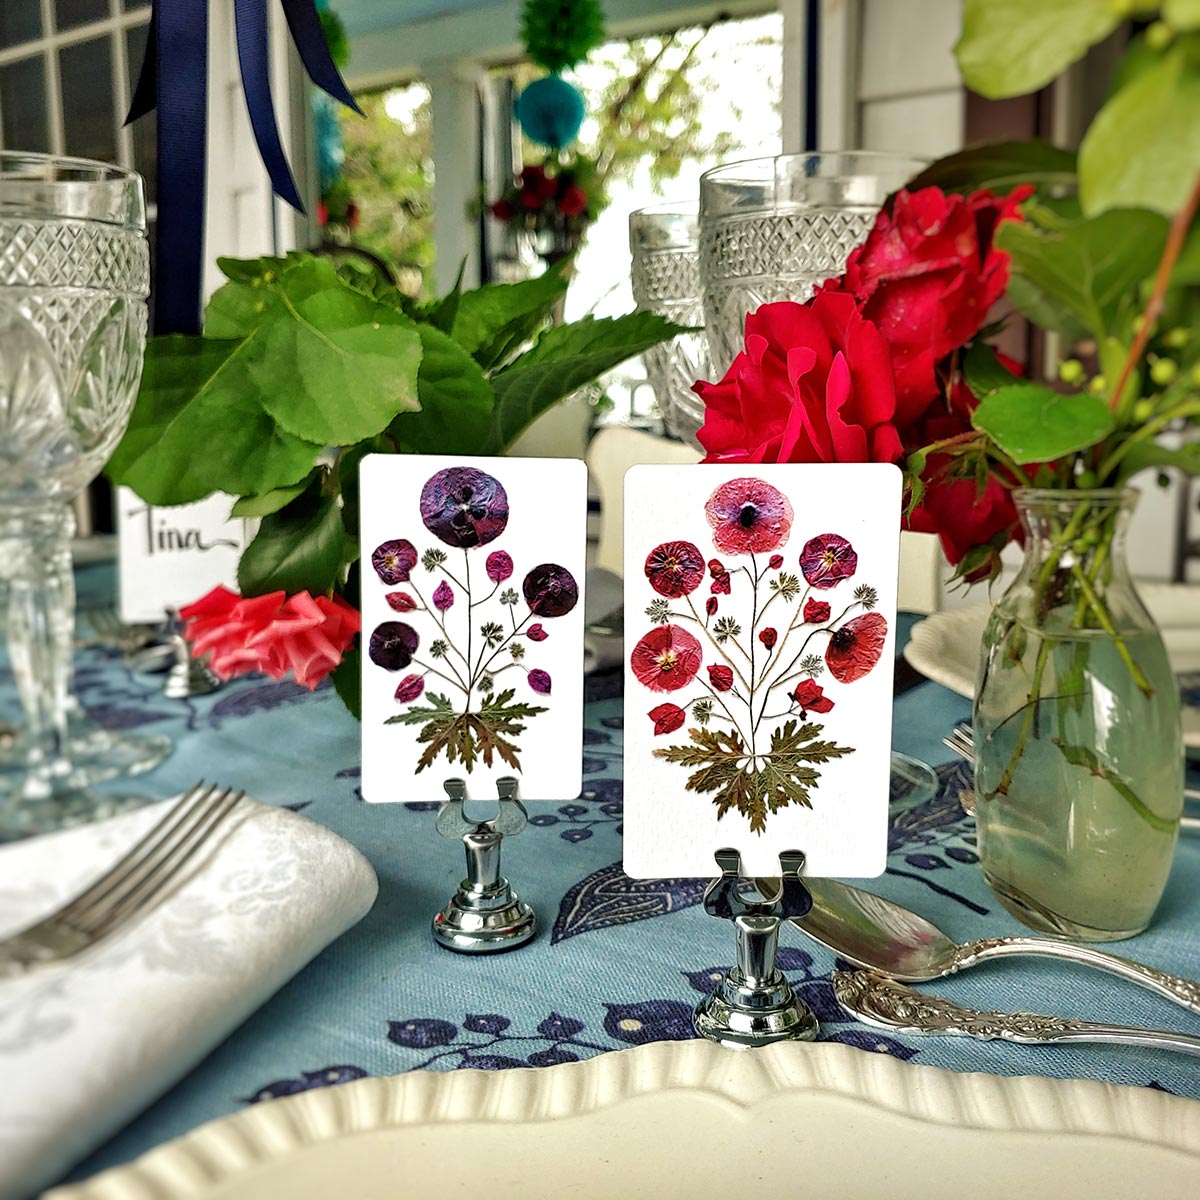 Mr_Ps_place_cards-Marian_Mcevoy-pressed_poppies_placecards